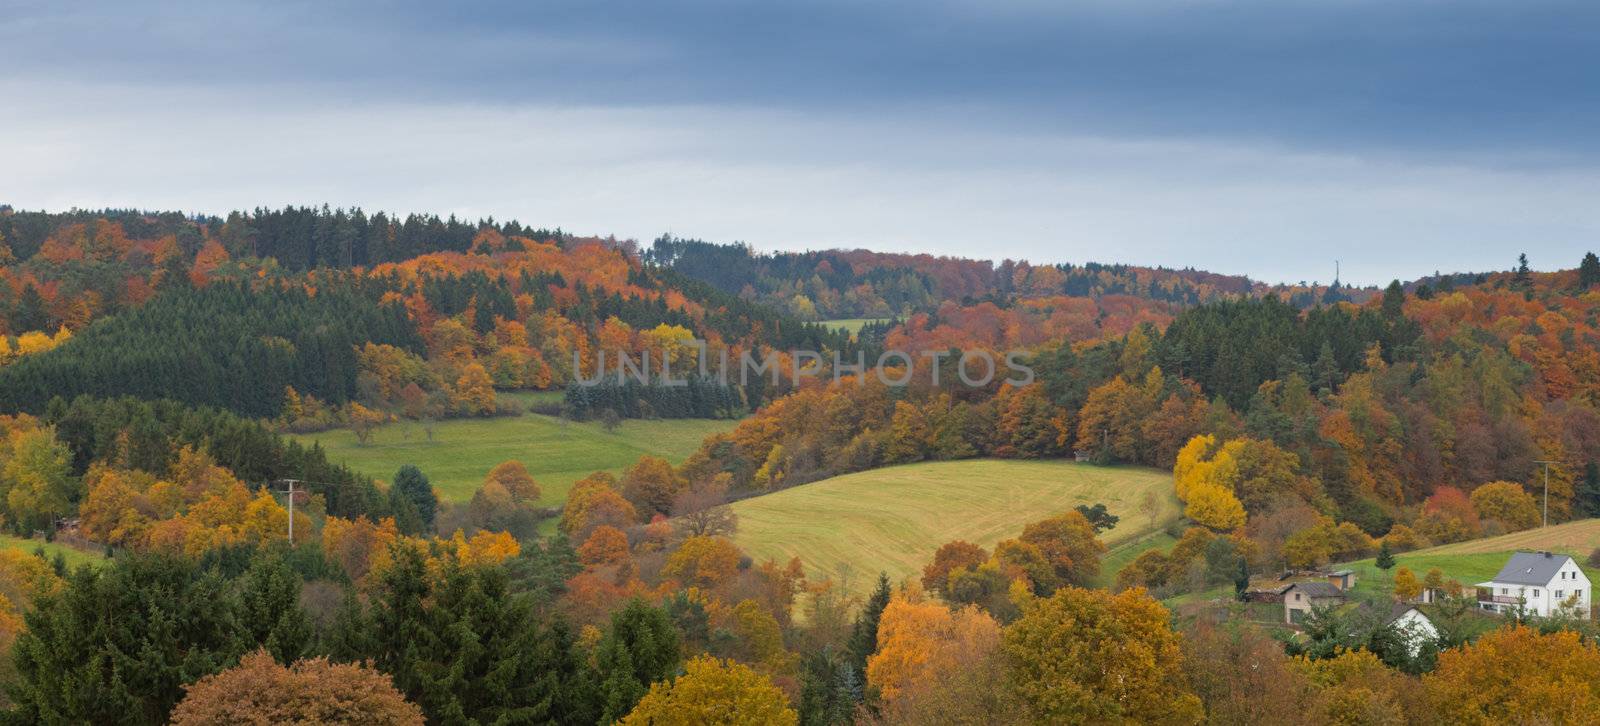 Valley with farmland, isolated house and forested hills in Eifel, rural Germany.